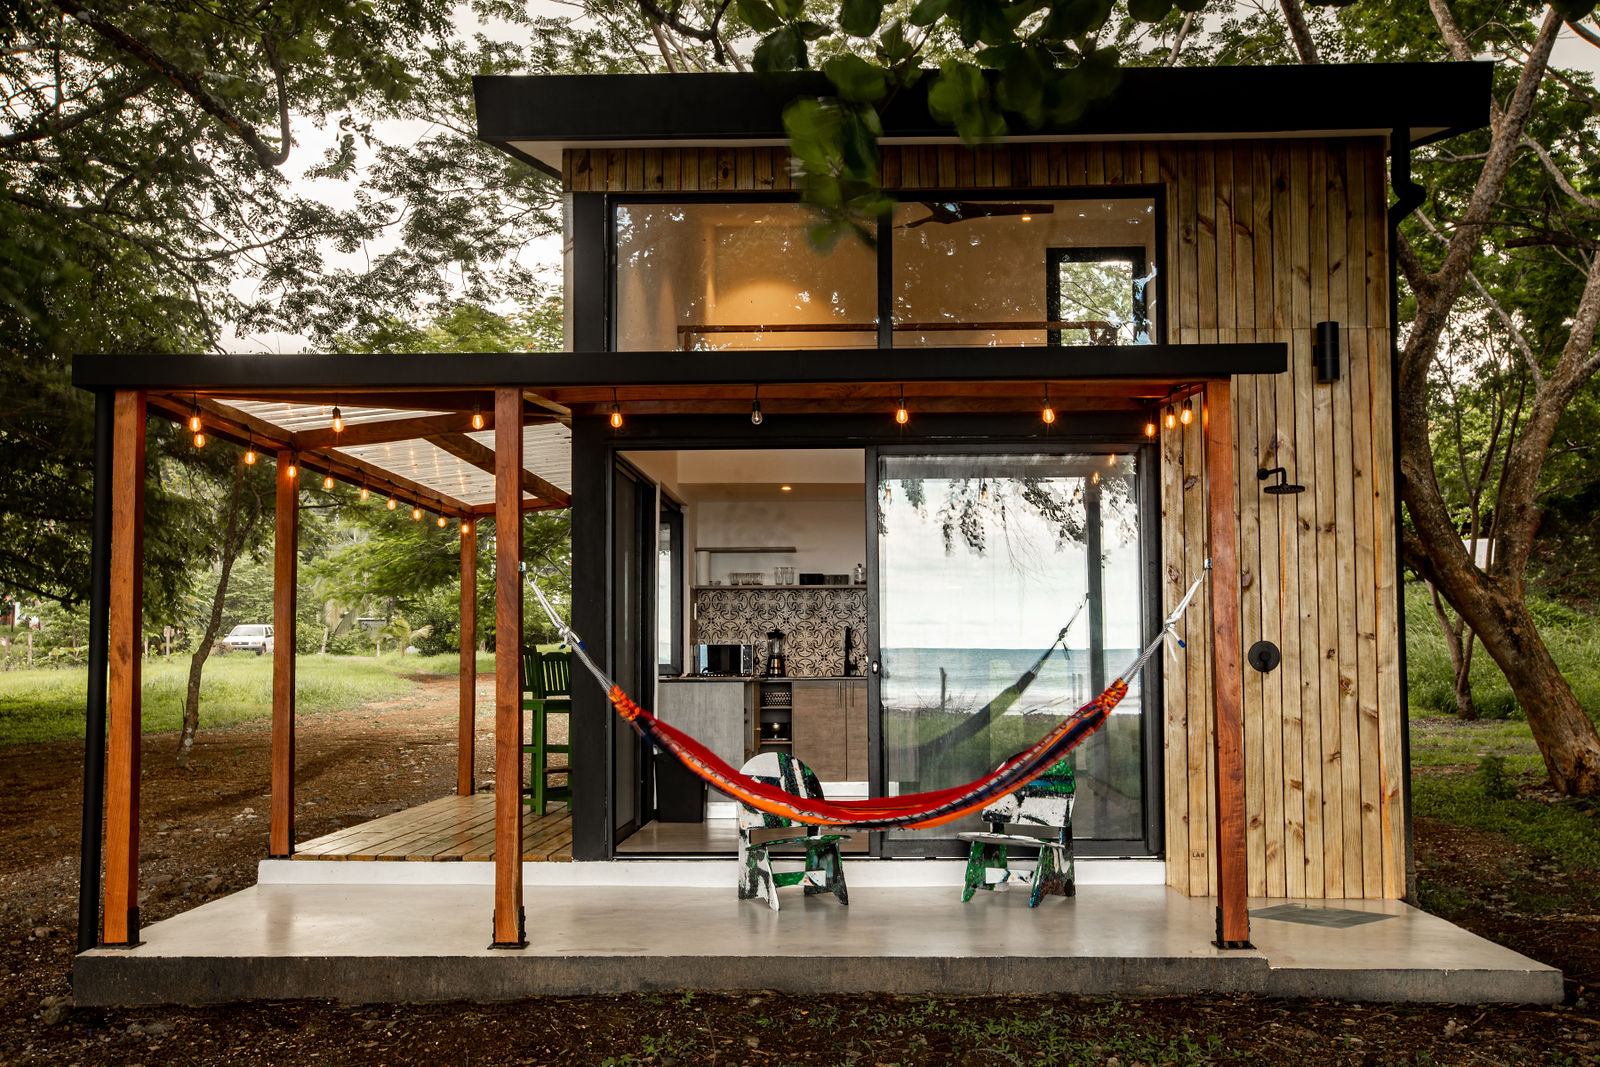 Live in a tiny home in Panama, sustainable living, eco friendly construction